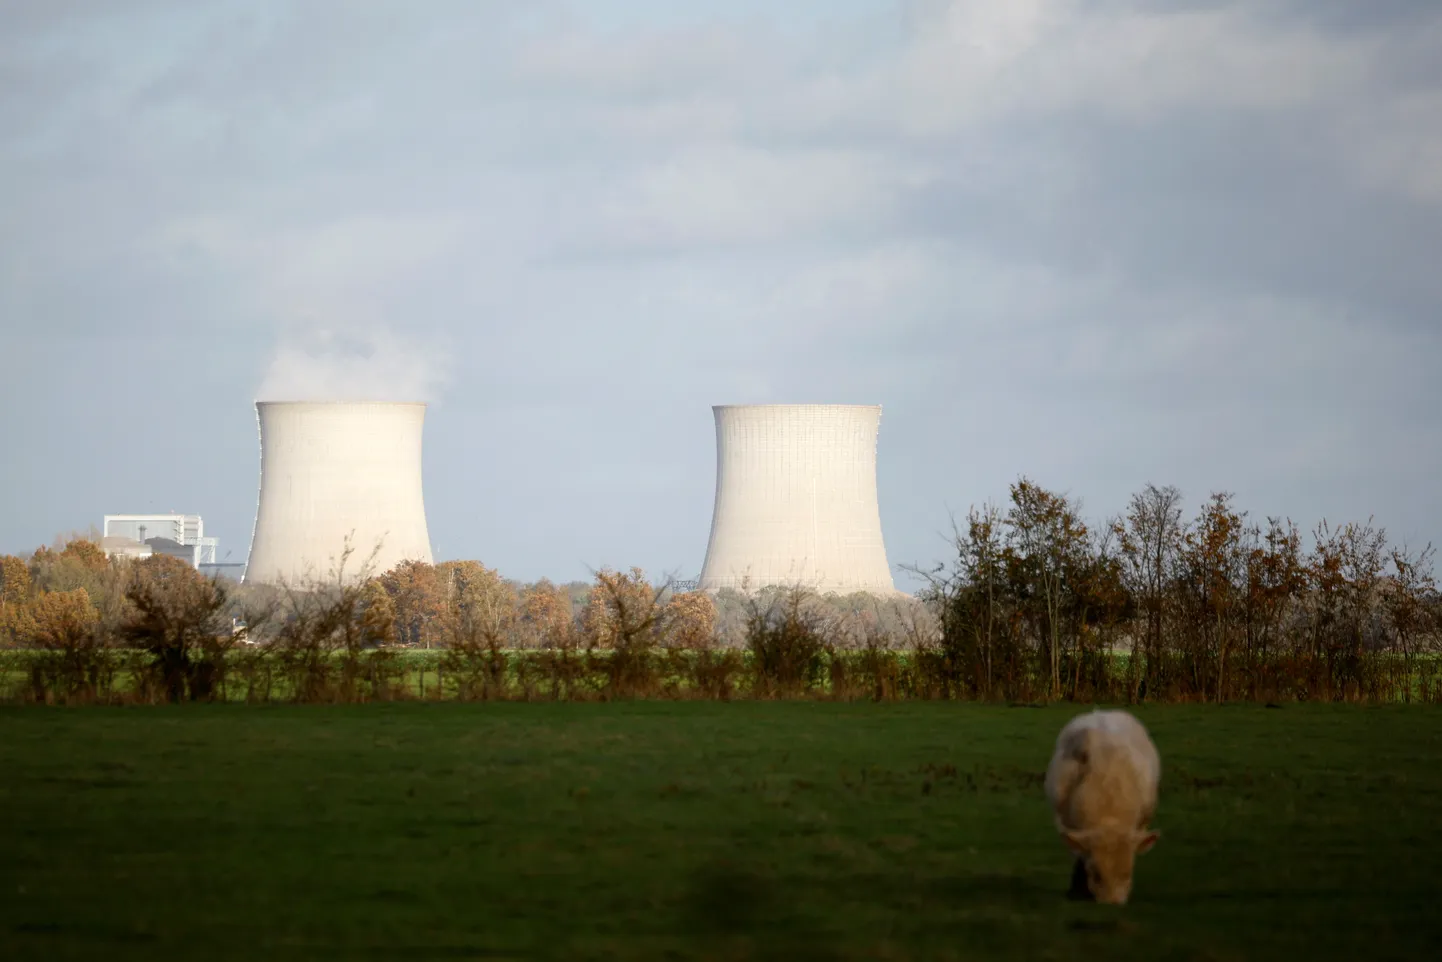 The cooling towers of the Saint-Laurent-Des-Eaux nuclear power plant site in Muides, near Orleans, France.